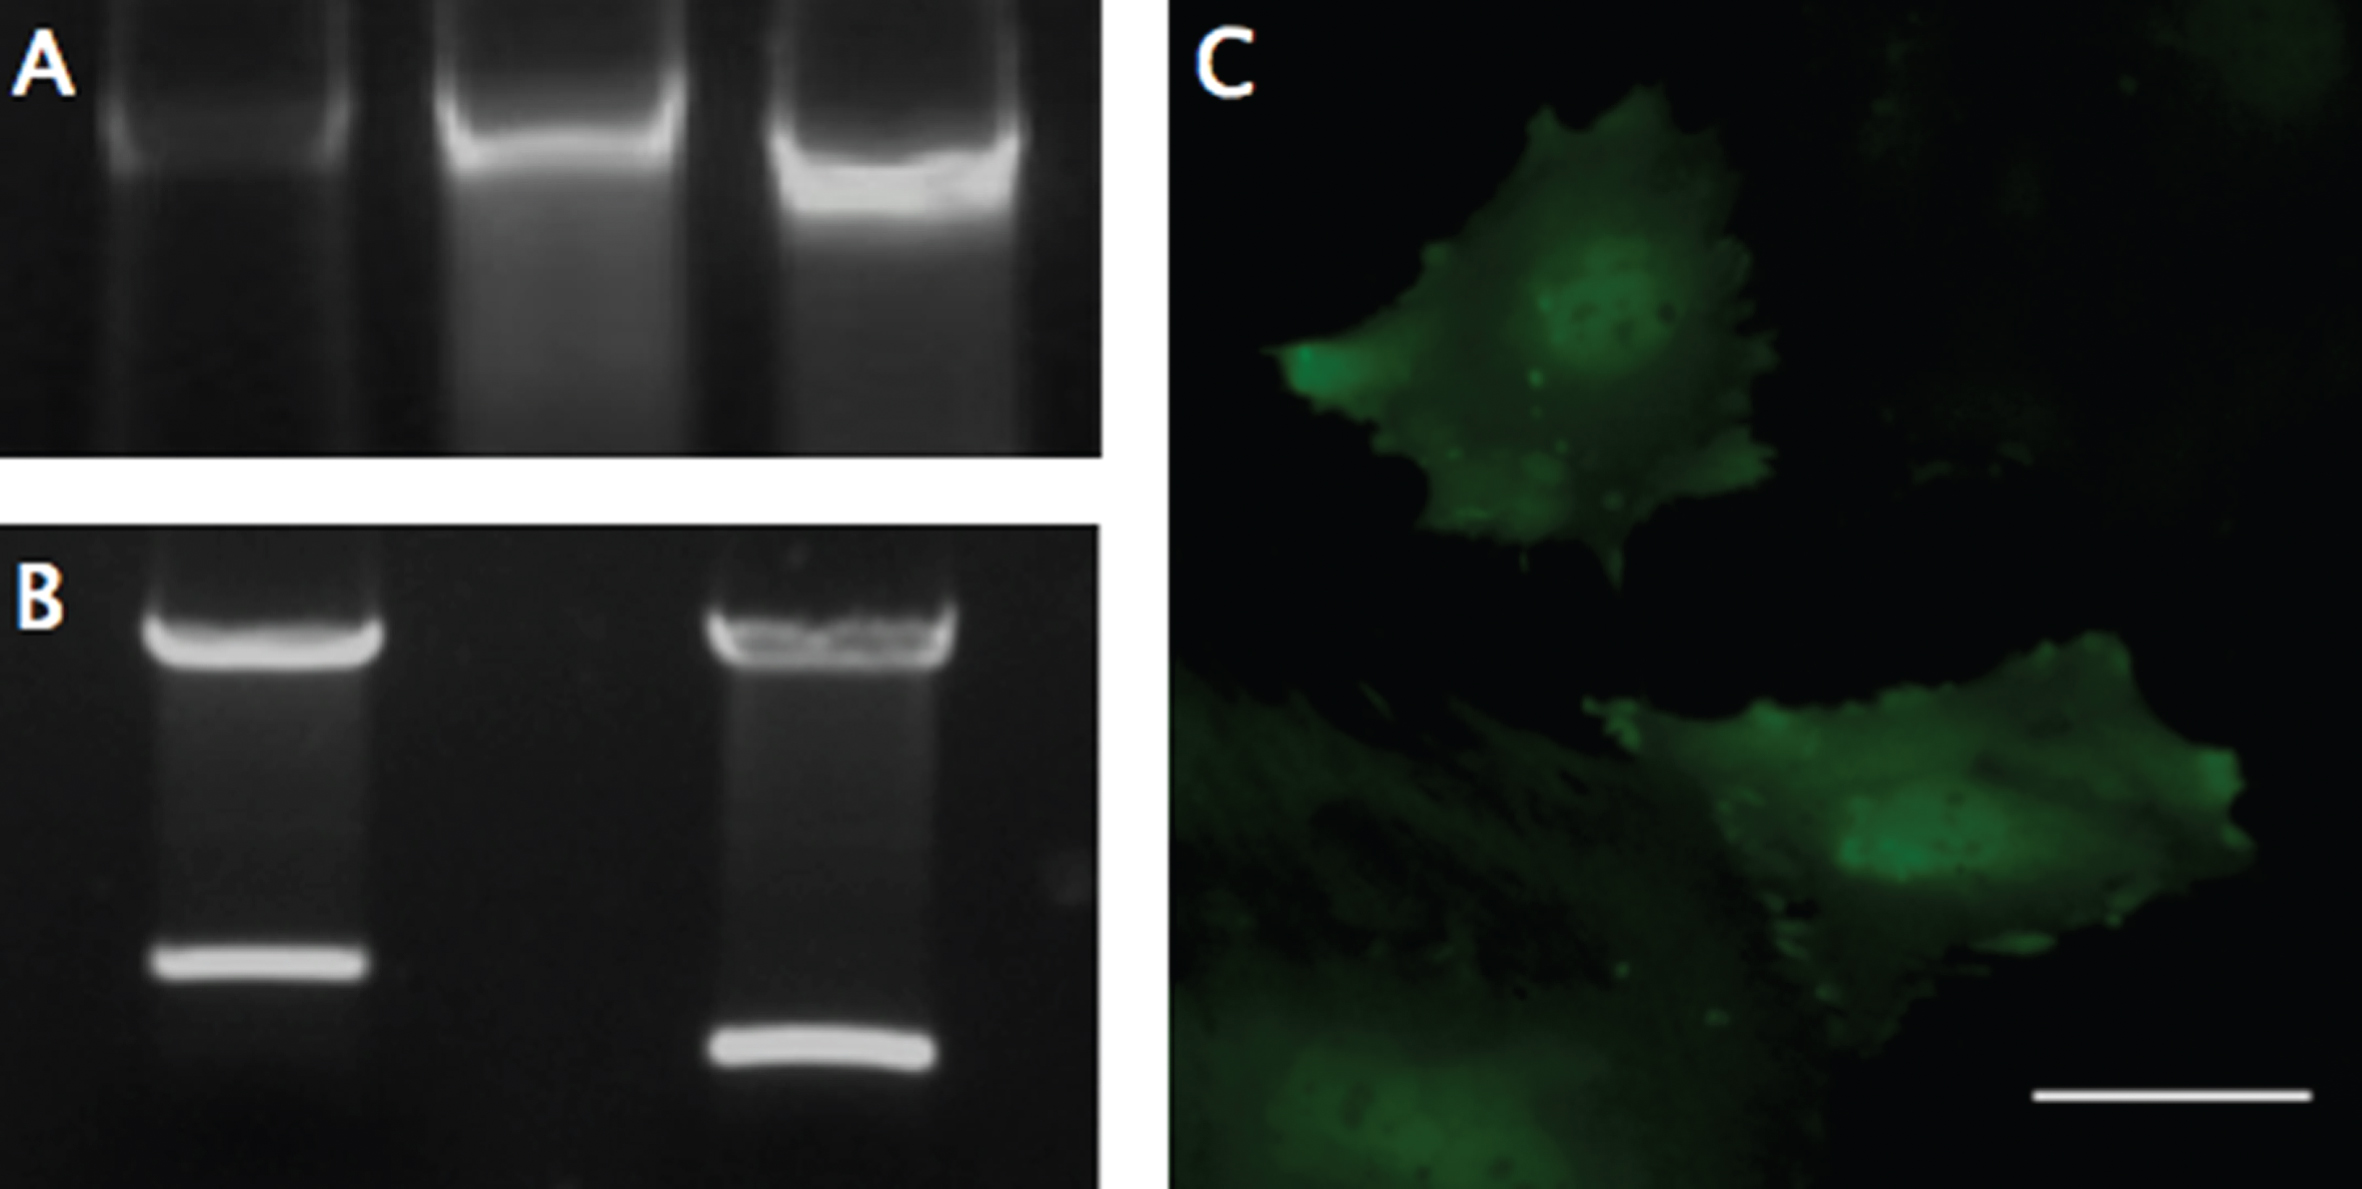 PCR, Digestion, and Fluorescent Expression. (A) Genomic DNA from modified MSCs was isolated and examined with PCR using primers designed to flank the multiple cloning site, to analyze the insertion of the SDF-1-T2A-GFP sequence (Left), using the plasmid DNA (Middle) and GFP only plasmid (Right) as size controls. The genomic DNA revealed size-matched PCR products to the plasmid and a ∼300 larger base-pair fragment, compared to the GFP control. (B) Restriction digestion was performed on the completed MSCV-puro retroviral vector with the SDF-1-T2A-GFP sequence (Left), or just GFP sequence (Right) inserted into the multiple cloning site between Bgl-II and EcoRI restriction sites. (C) GFP was used as a reporter gene to confirm transcription and translation of the engineered sequence. GFP expression was confirmed using fluorescent microscopy with a FITC filter. Scale bar represents 50-μm.